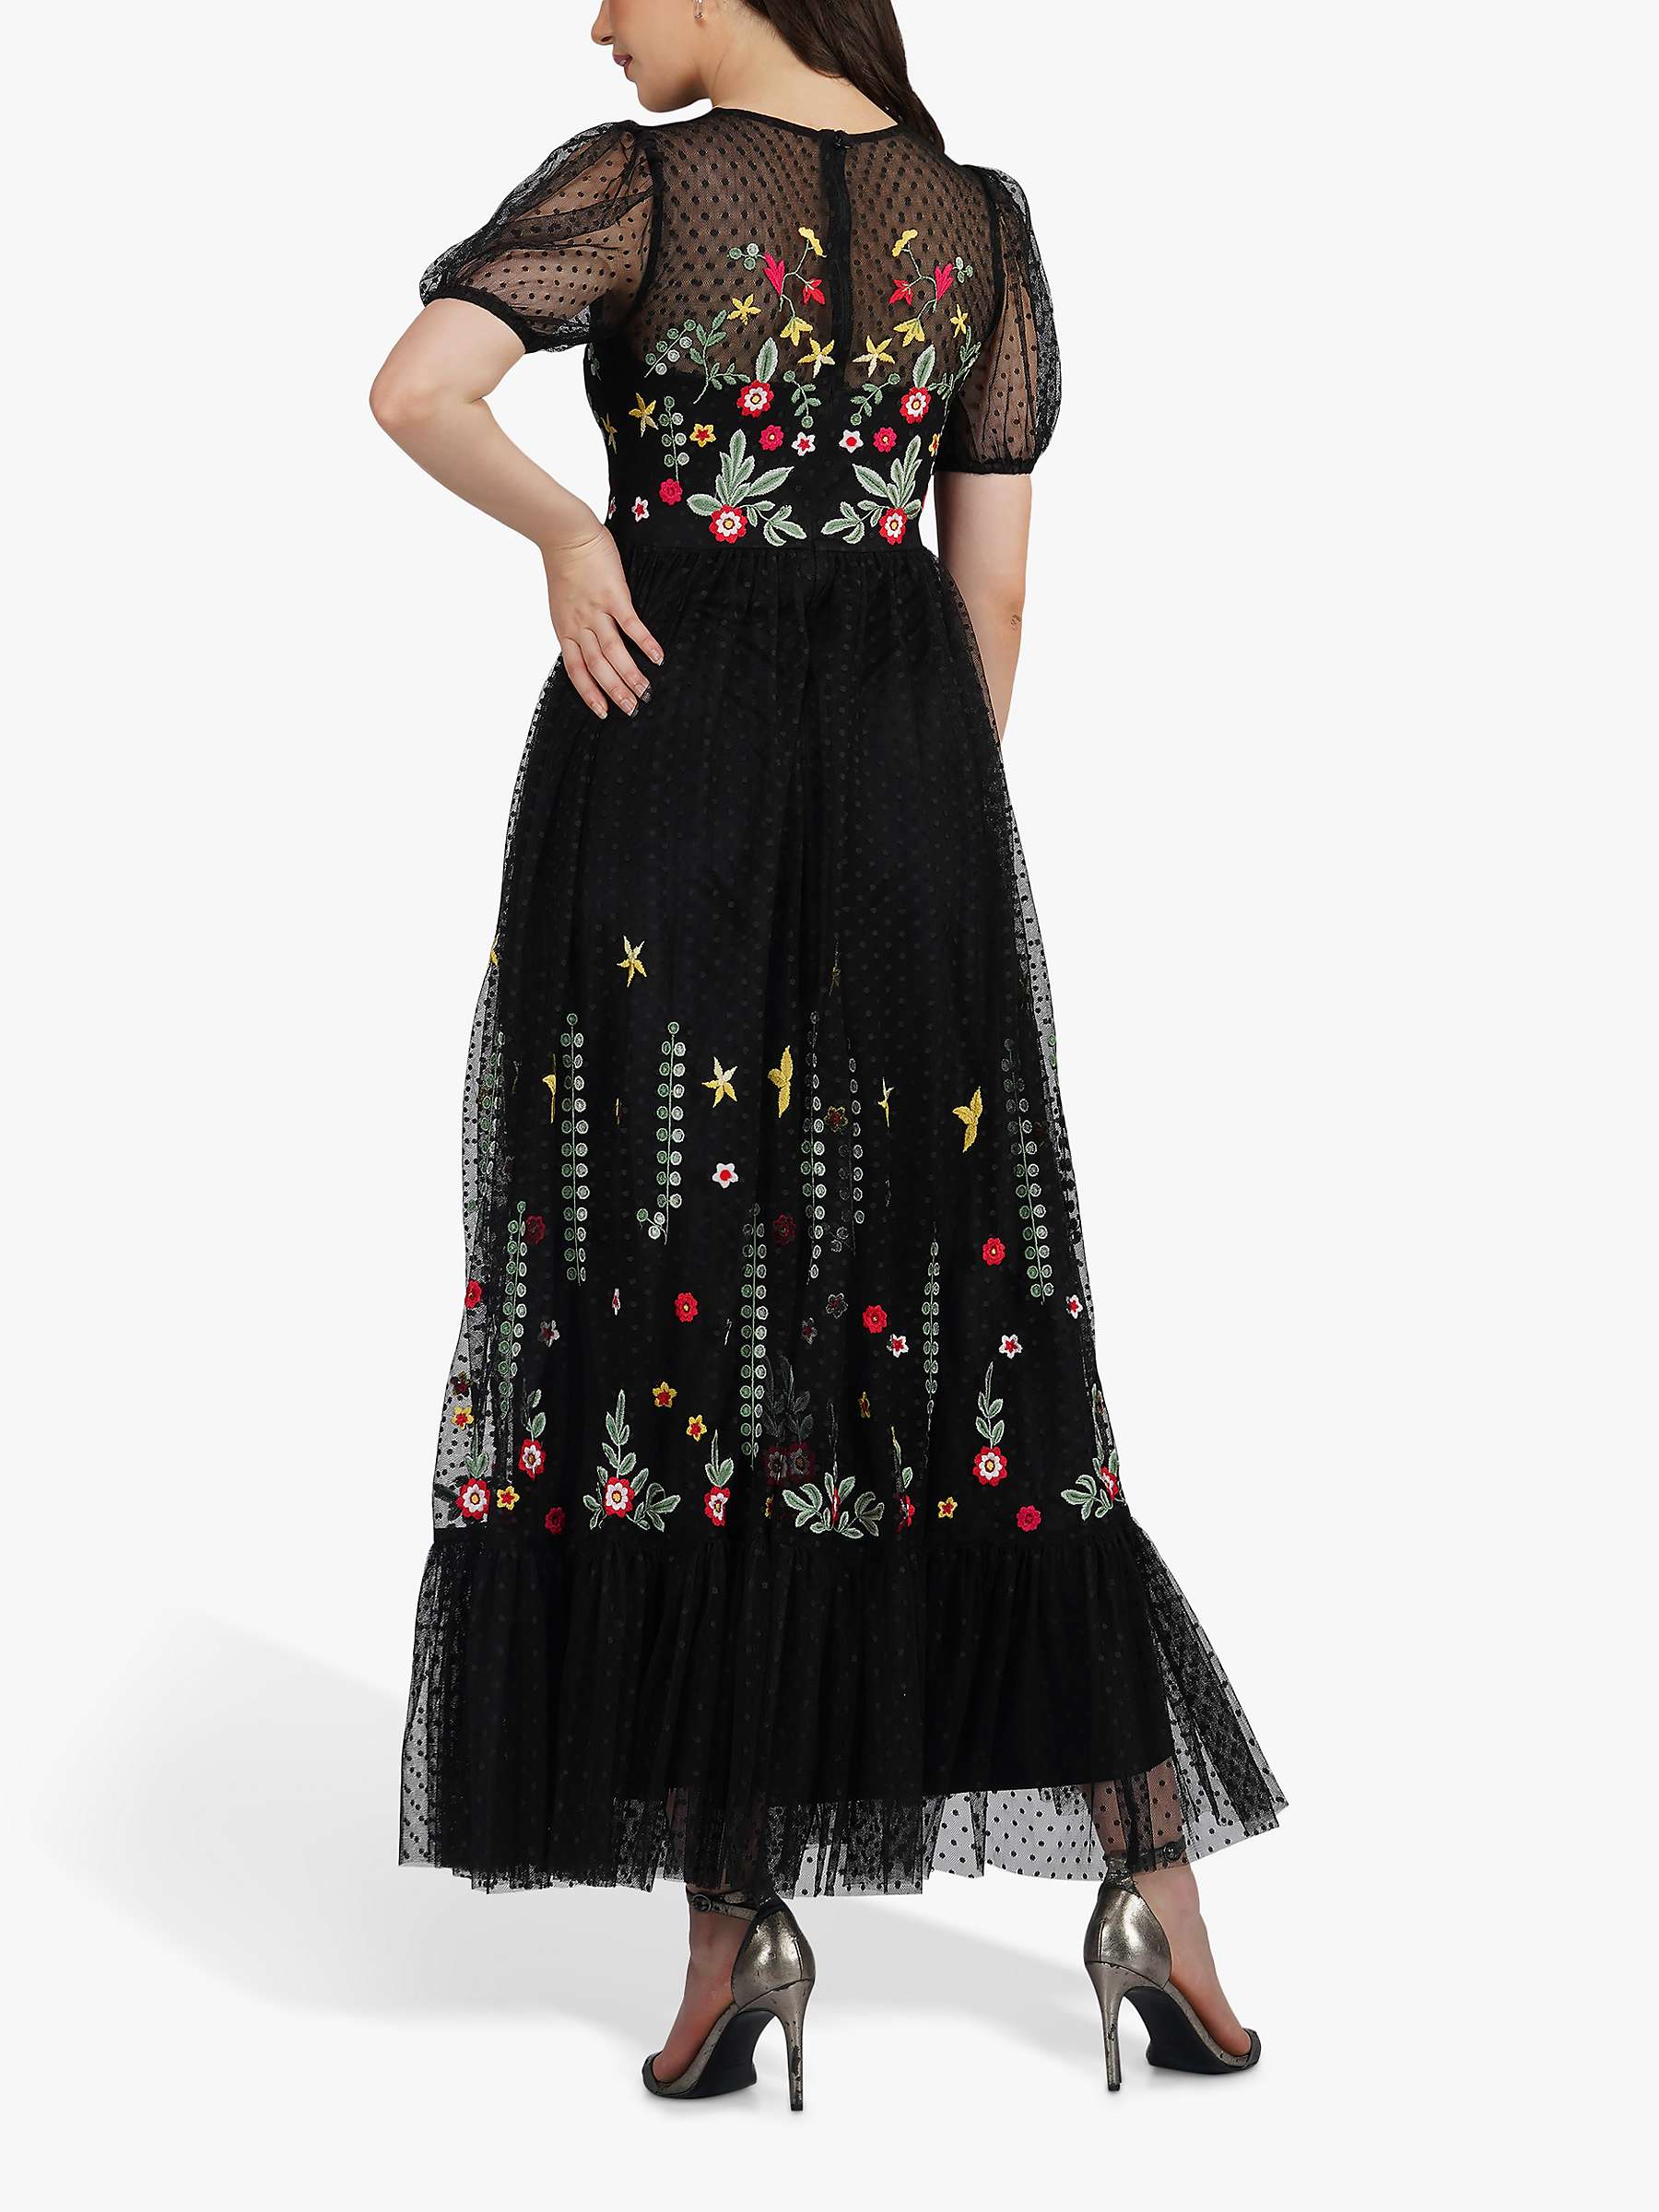 Buy Lace & Beads Dahlia Tulle Embroidered Maxi Dress, Black/Multi Online at johnlewis.com